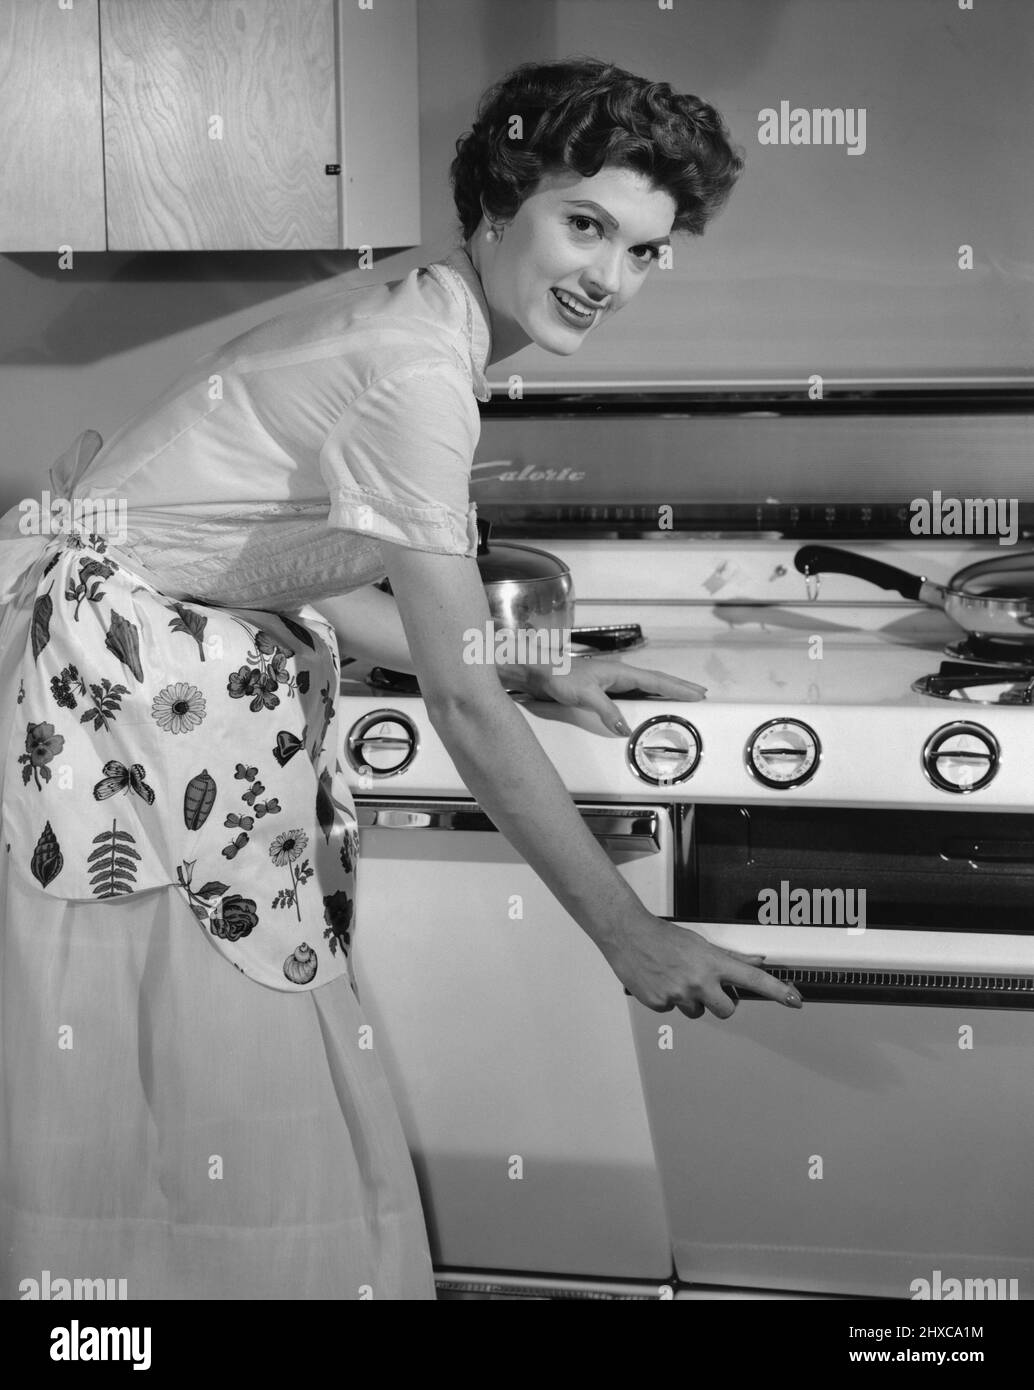 Mid-30's aged woman in a dress and apron, smiling while bending over to open oven door Stock Photo